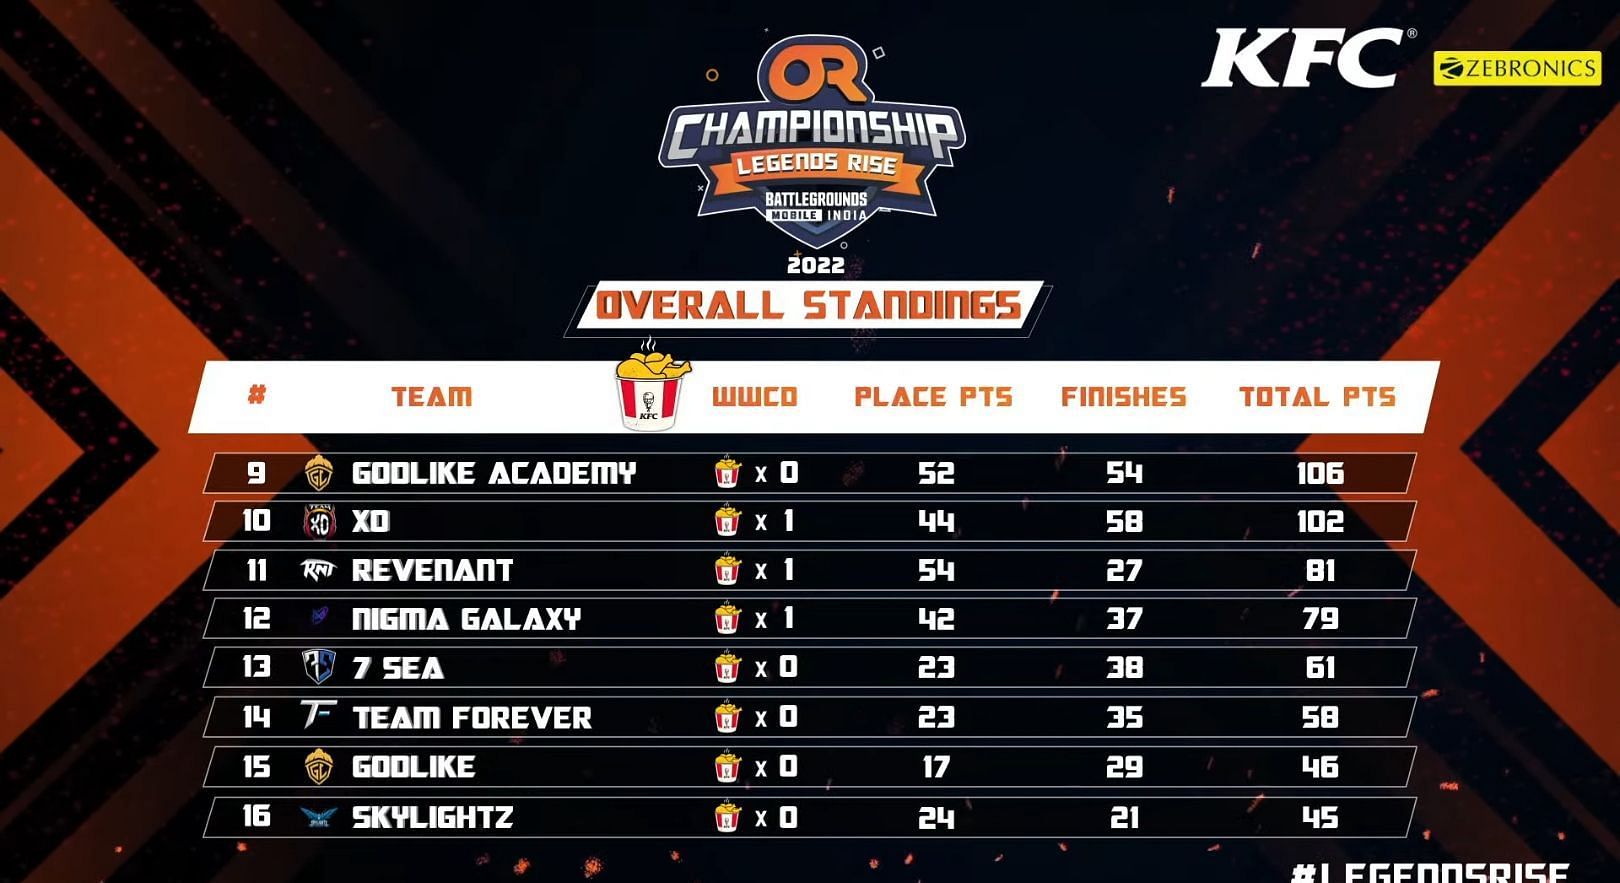 Overall ranking of BGMI OR Championship: Legends Rise 2022 (Image via OR Esports)